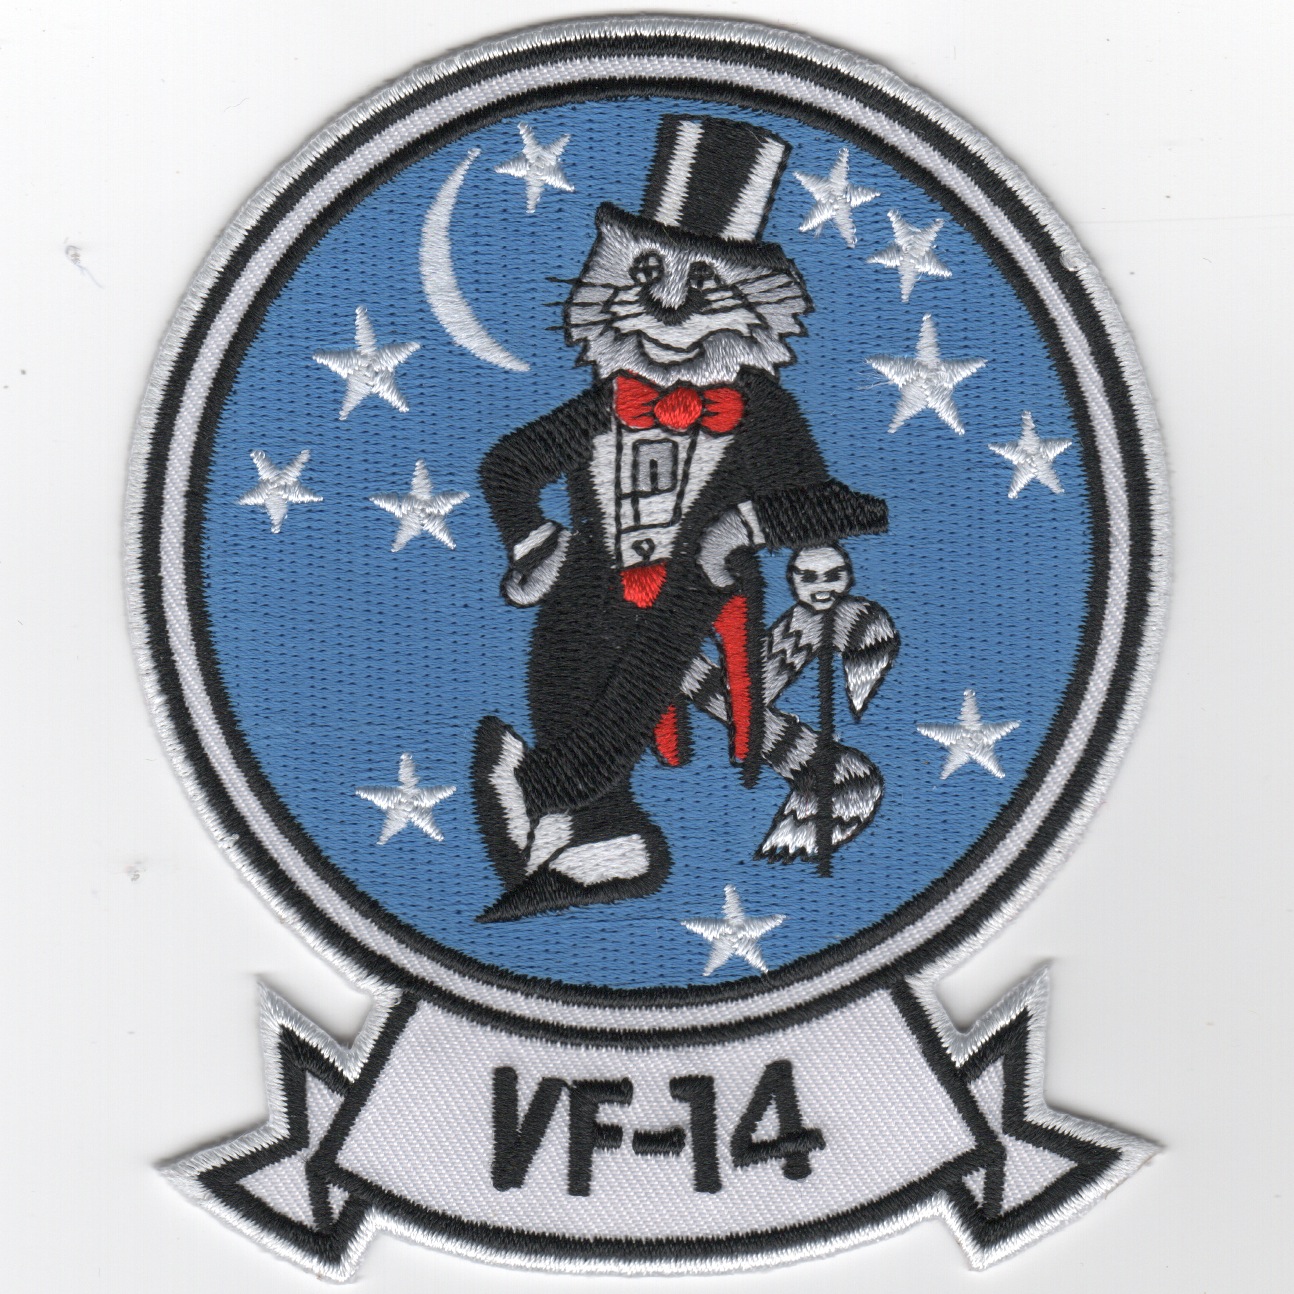 VF-14 Squadron Patch (Old Style)